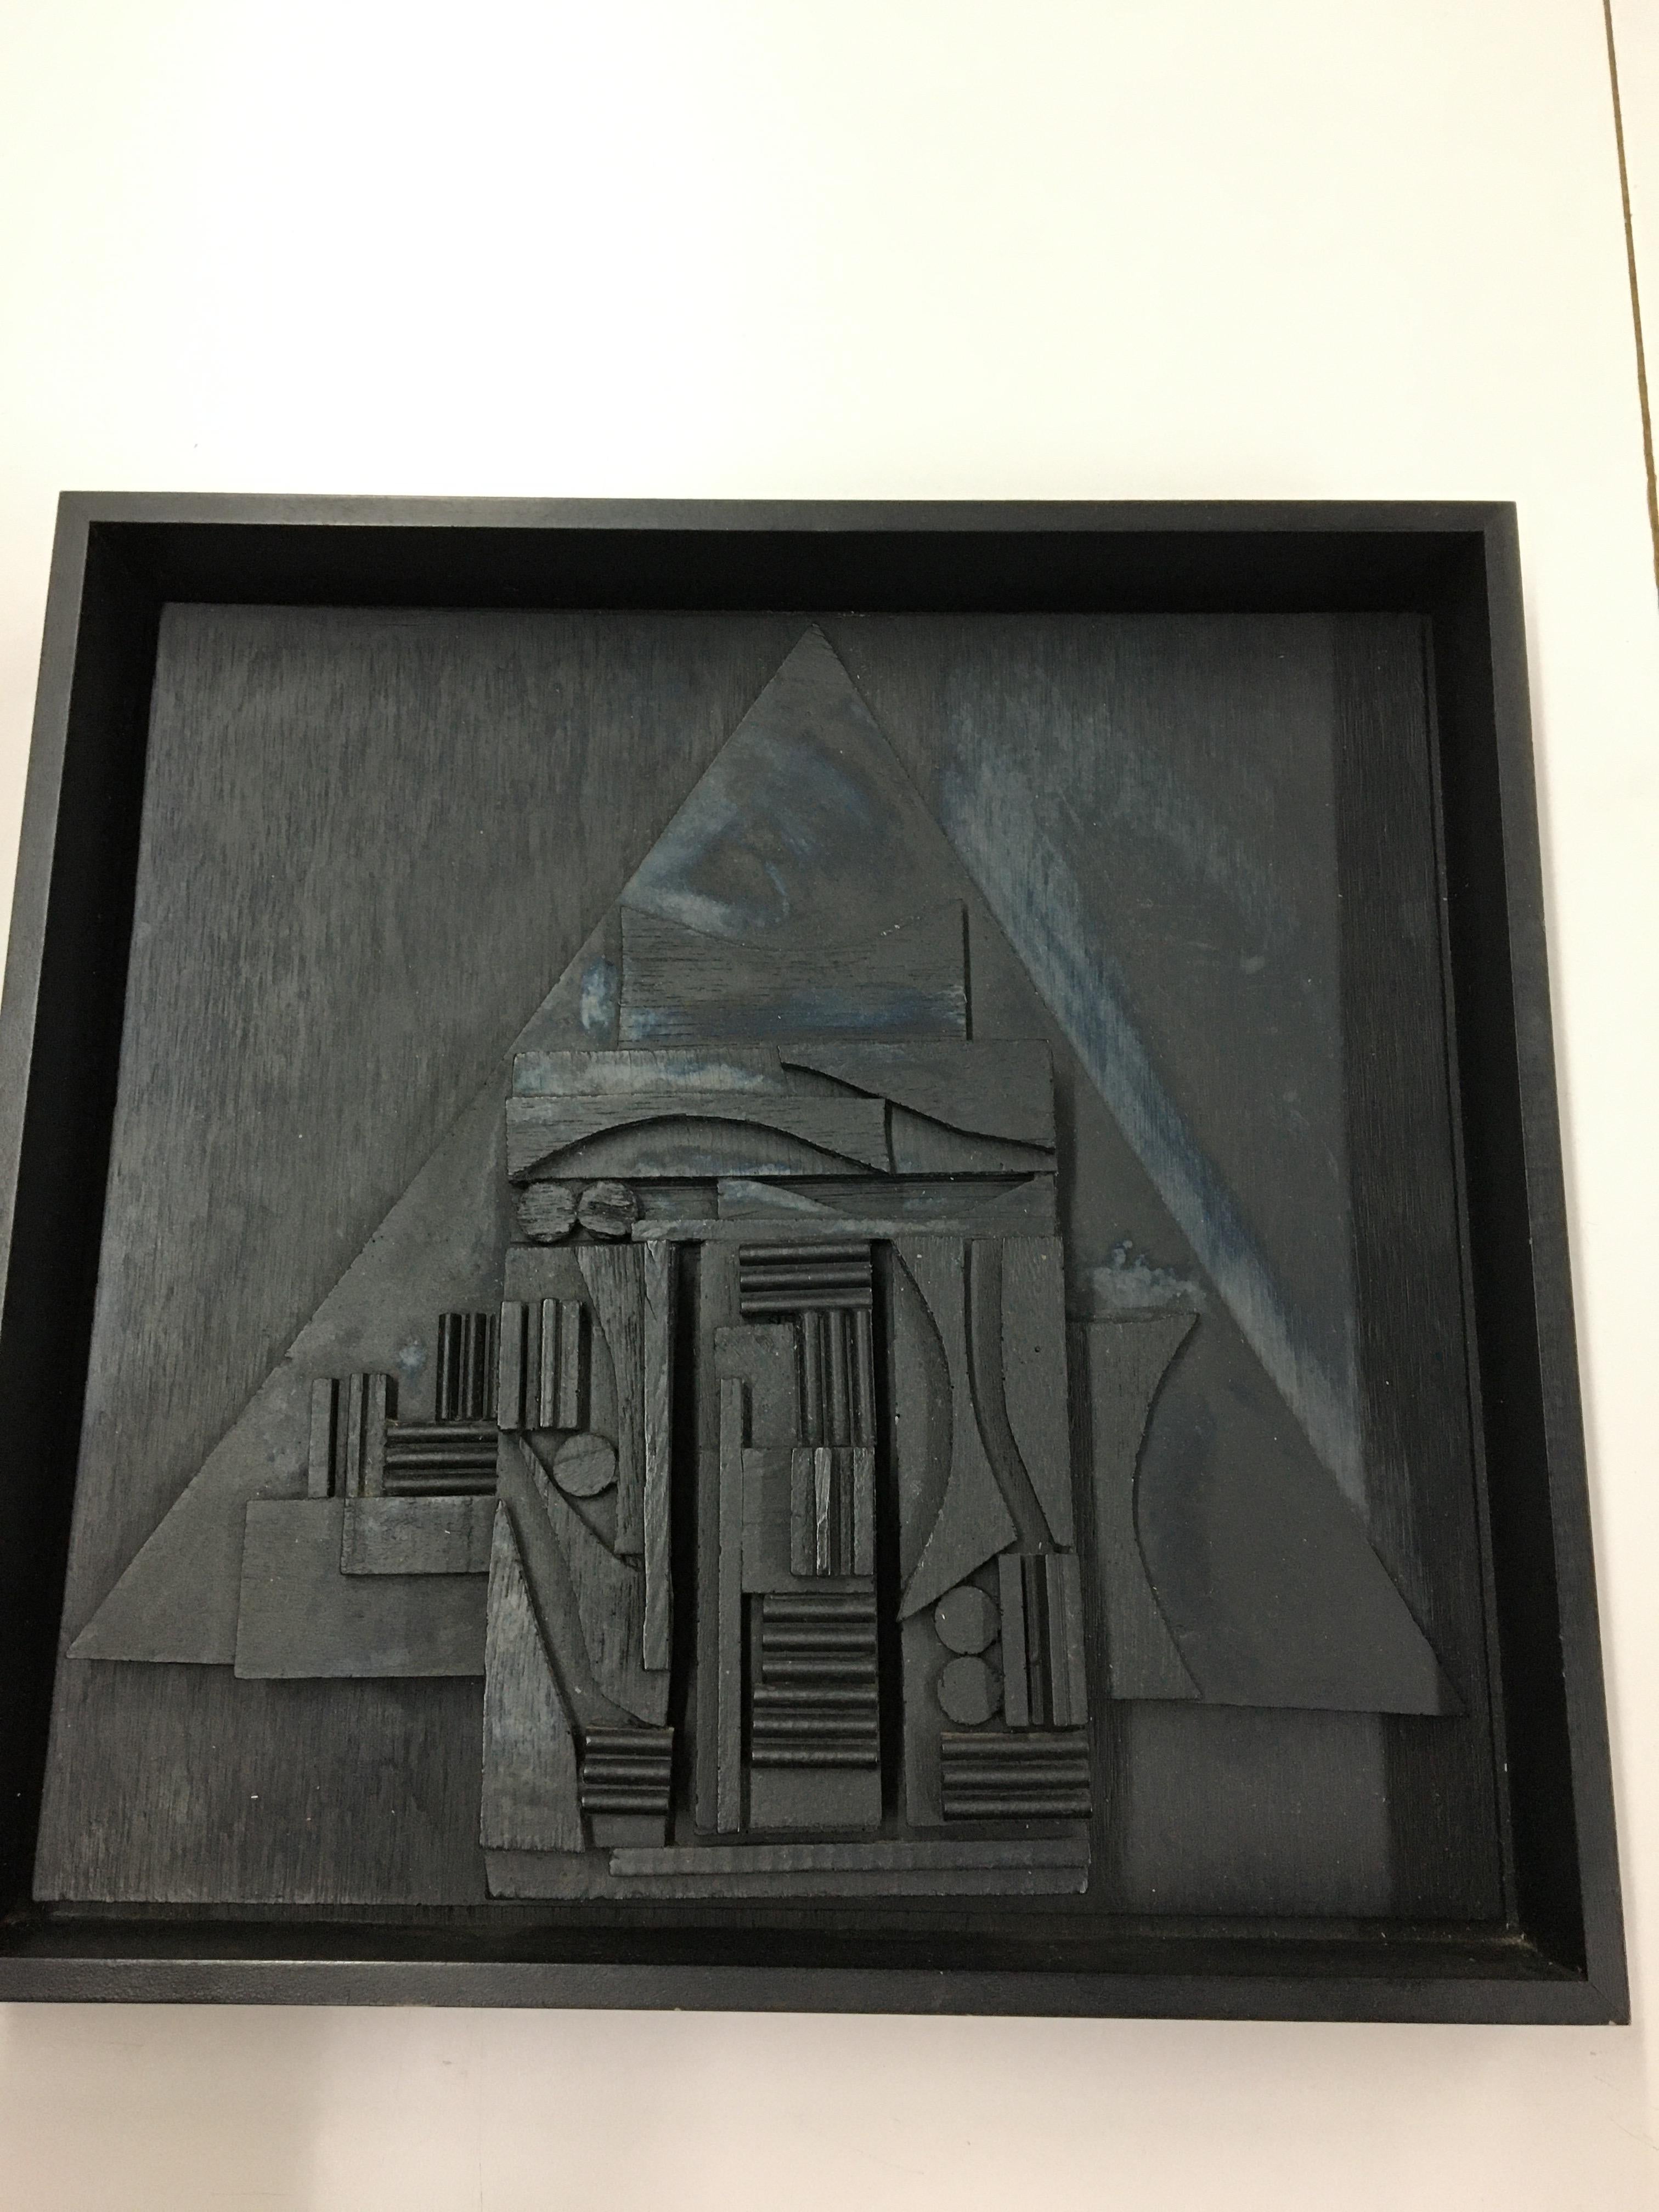 The Louise Nevelson Sculpture for the American Book Award 5